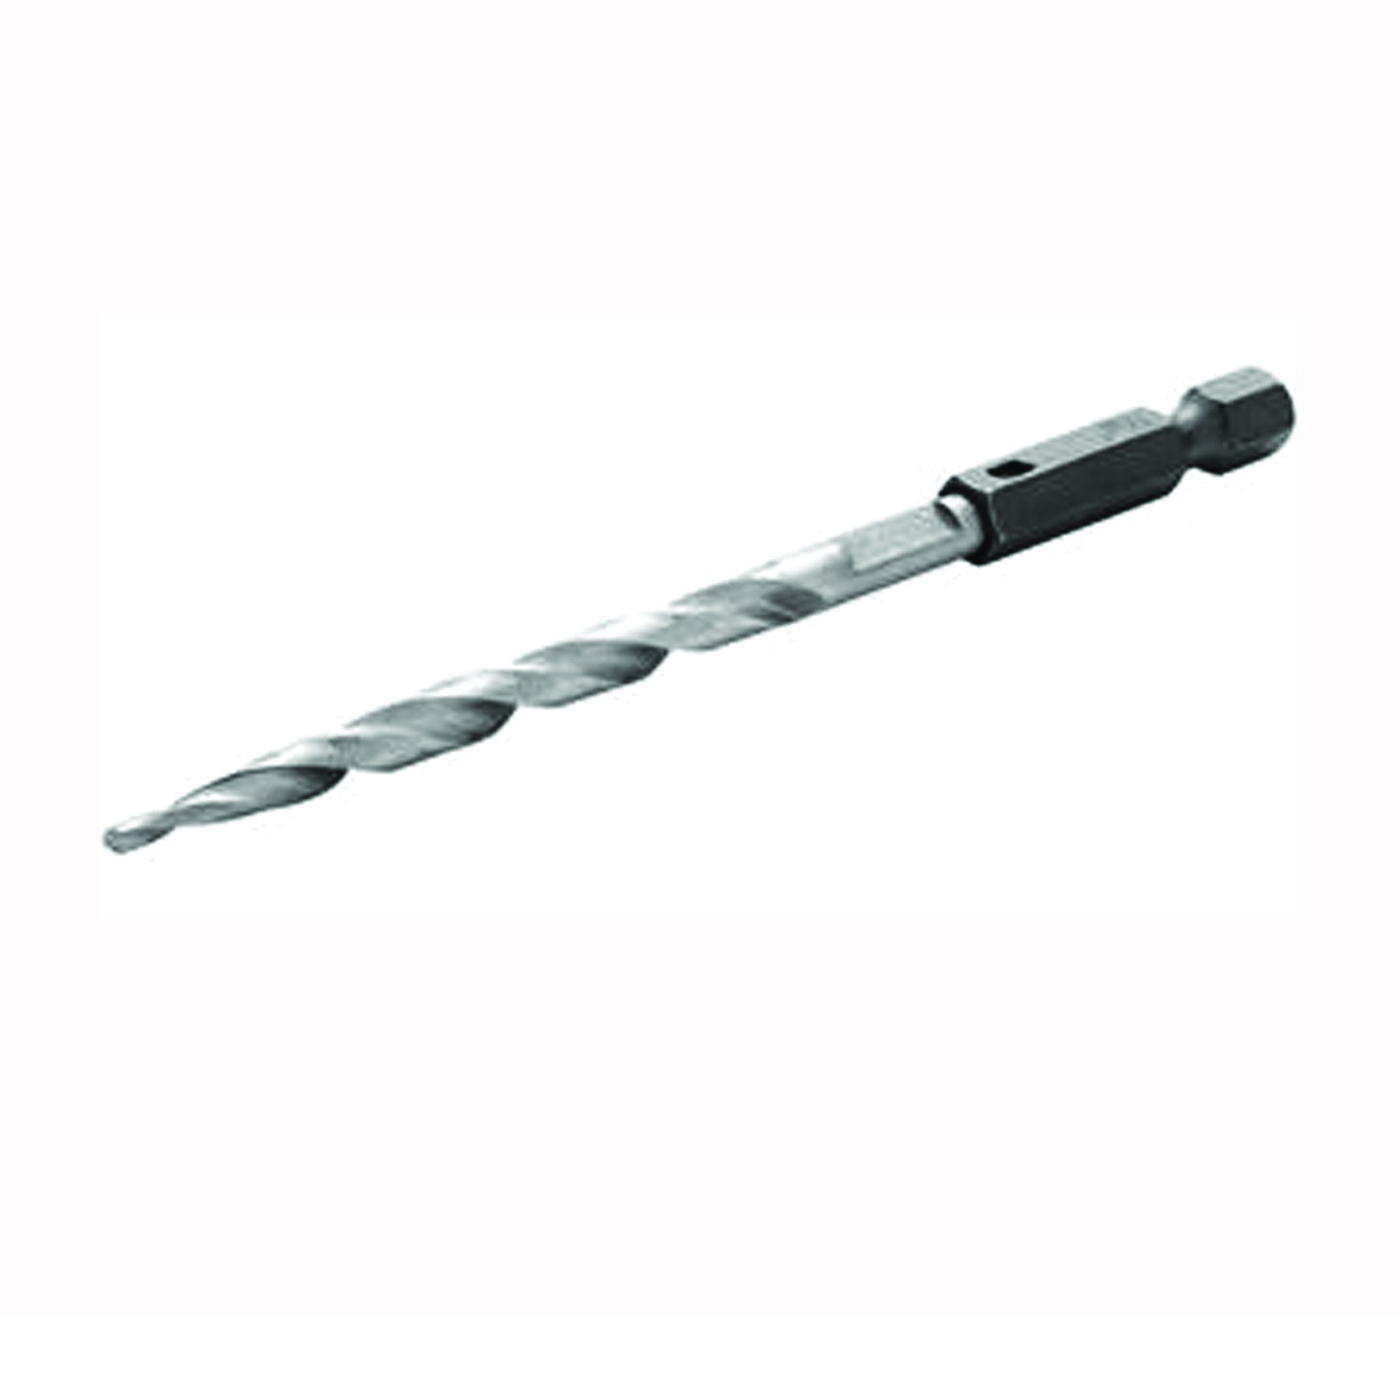 1882788 Replacement Drill Bit, 11/64 in Dia, Countersink, Widened Flute, 1/4 in Dia Shank